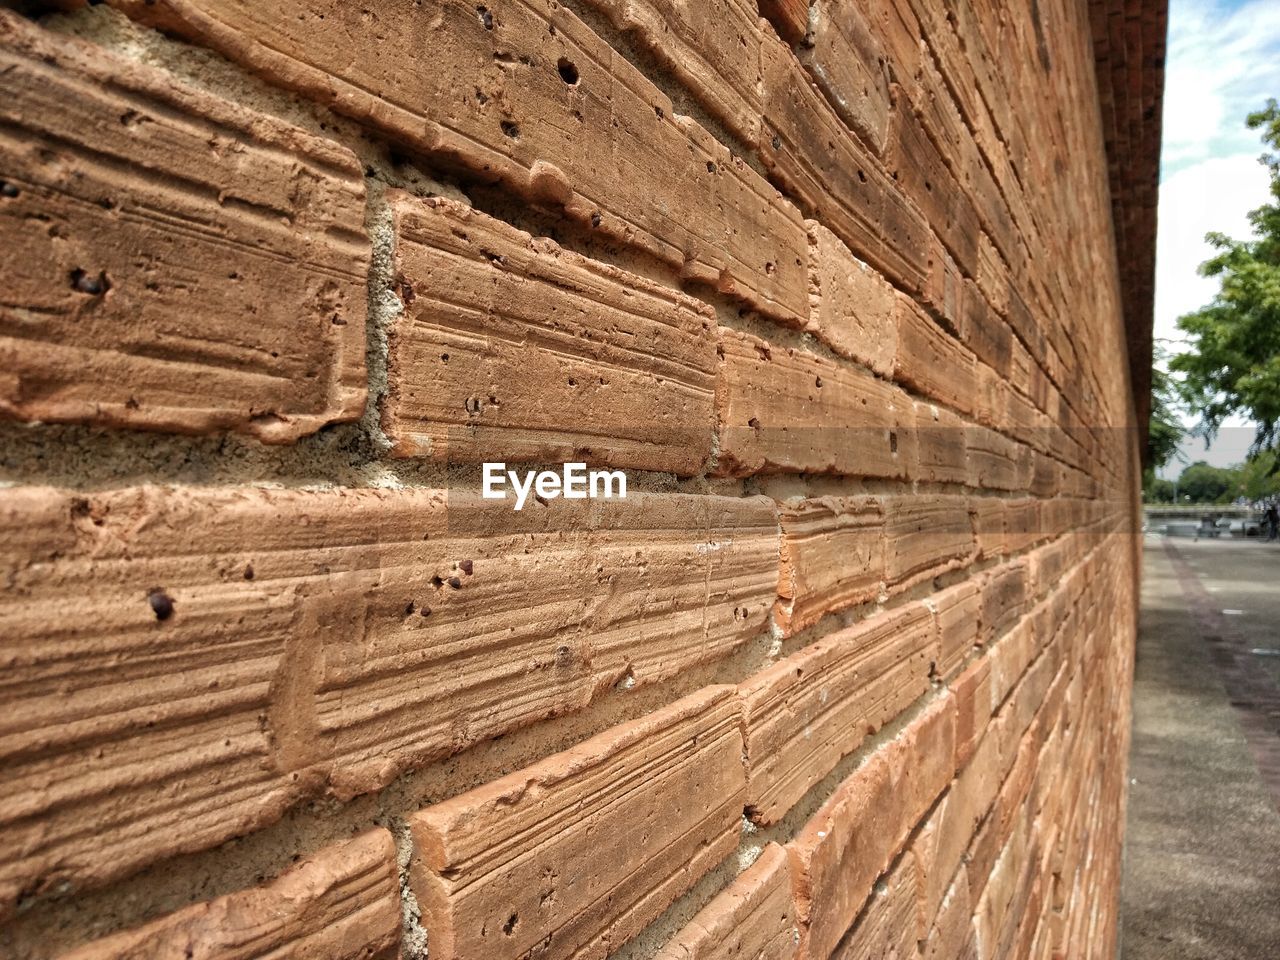 CLOSE-UP OF WOOD AGAINST TREE